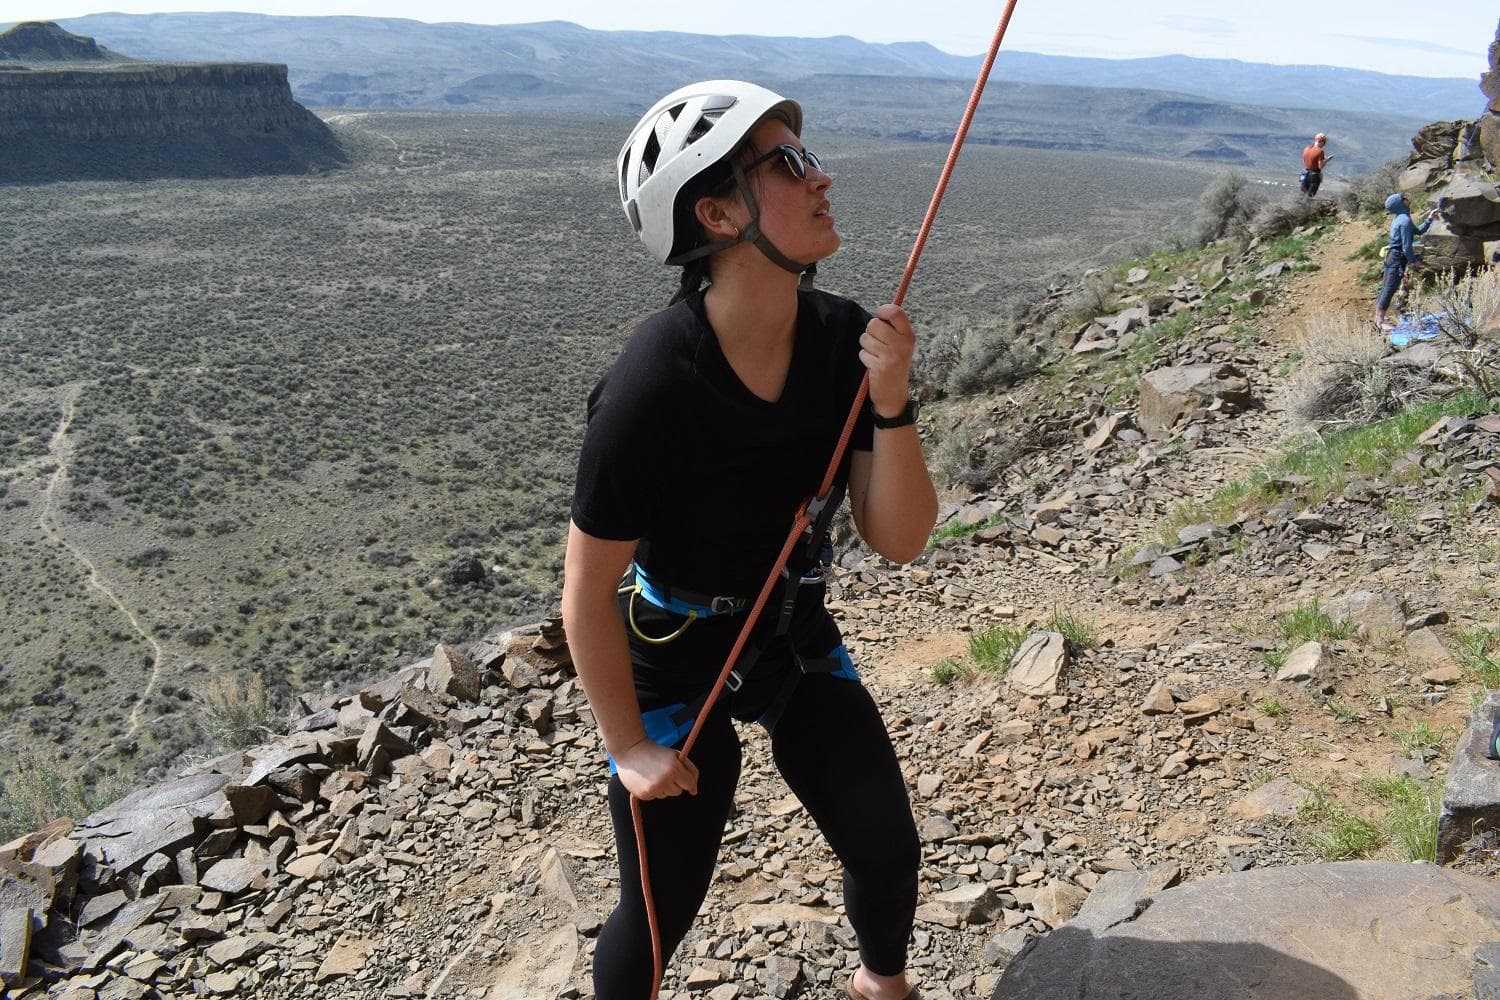 A belayer is ready to catch the climber if they fall